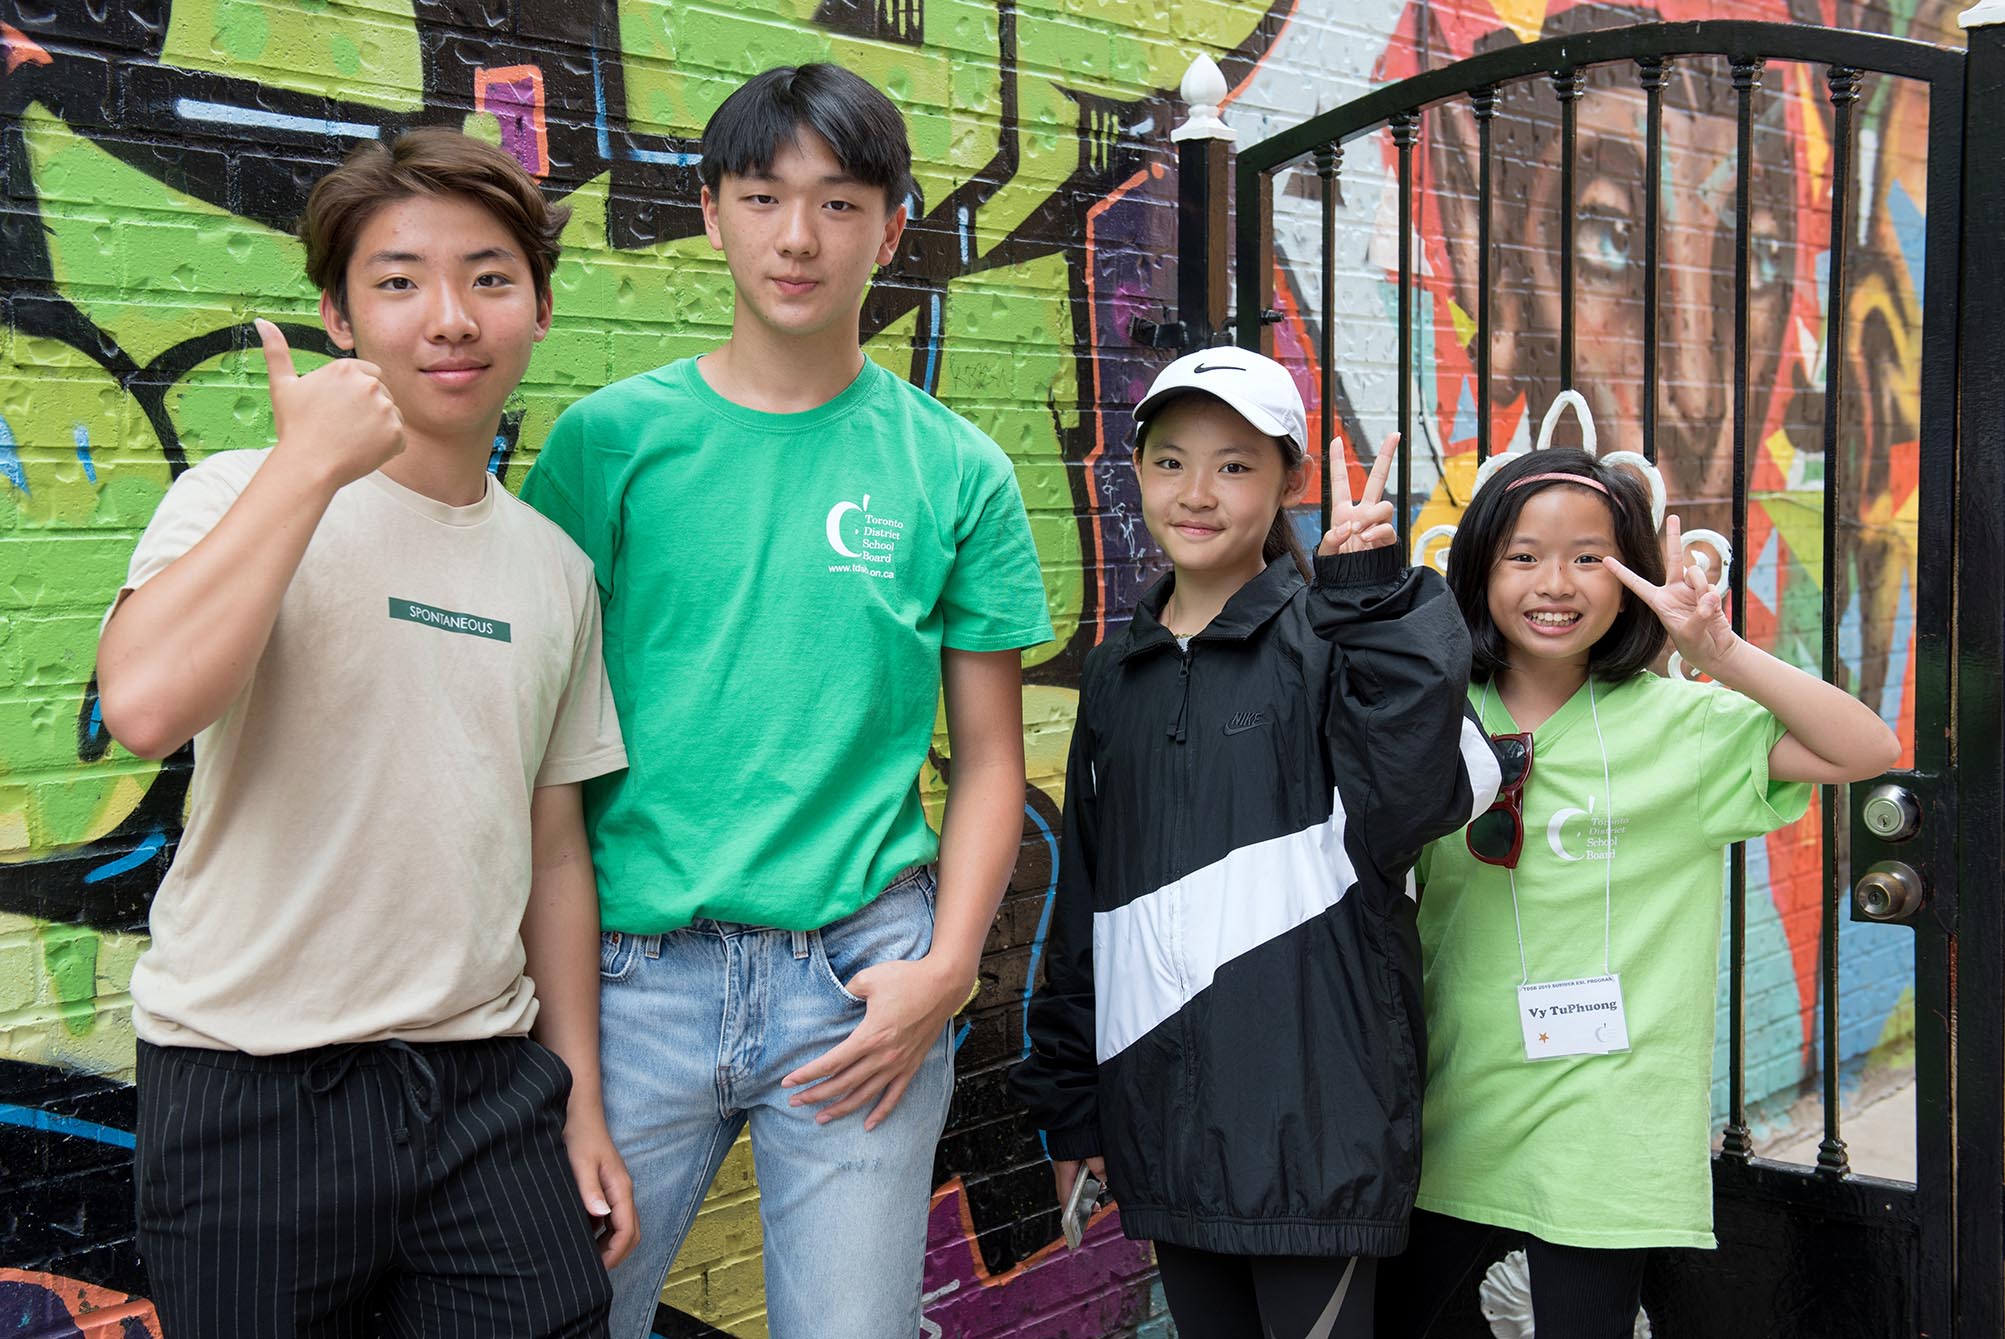 Students posing in front of graffiti wall Open Gallery